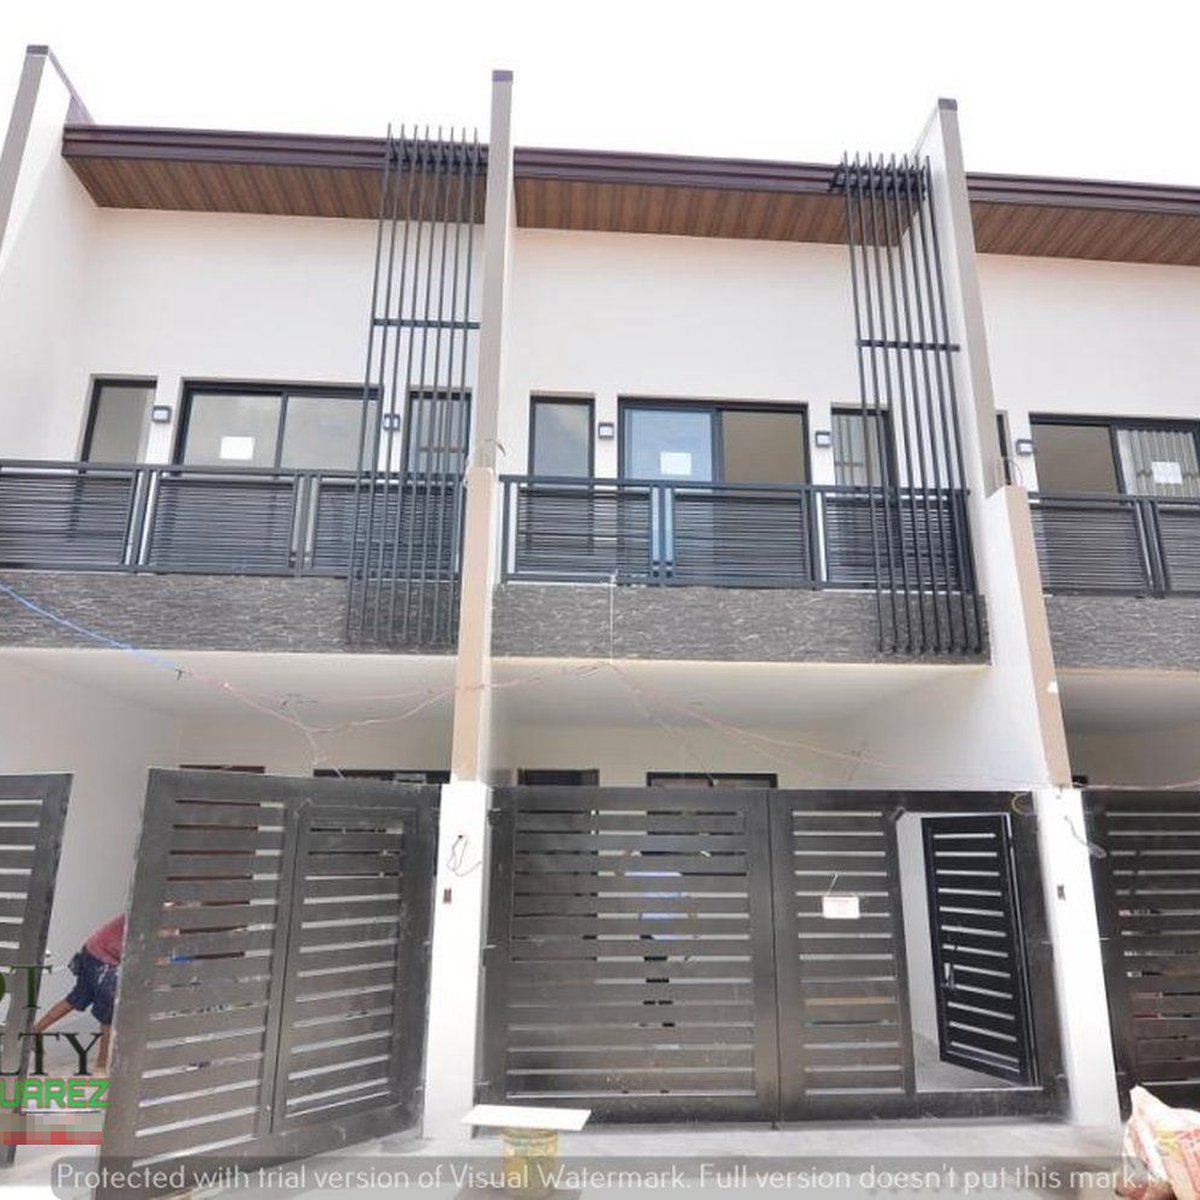 4 Bedrooms Town House near in SM South Mall Las Pinas